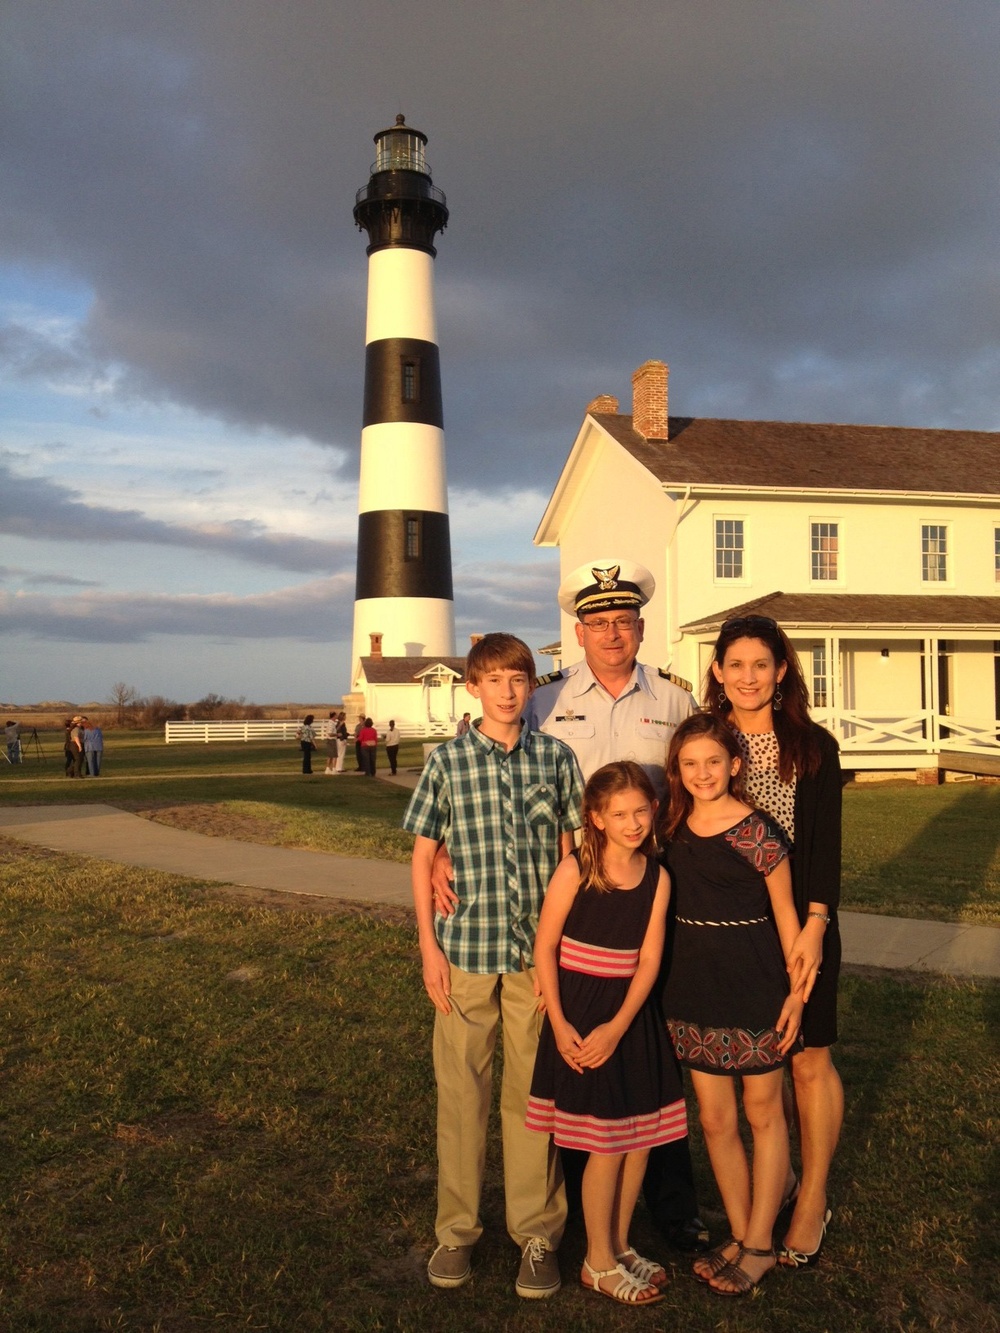 Lighthouse keeper's descendants attend relighting ceremony